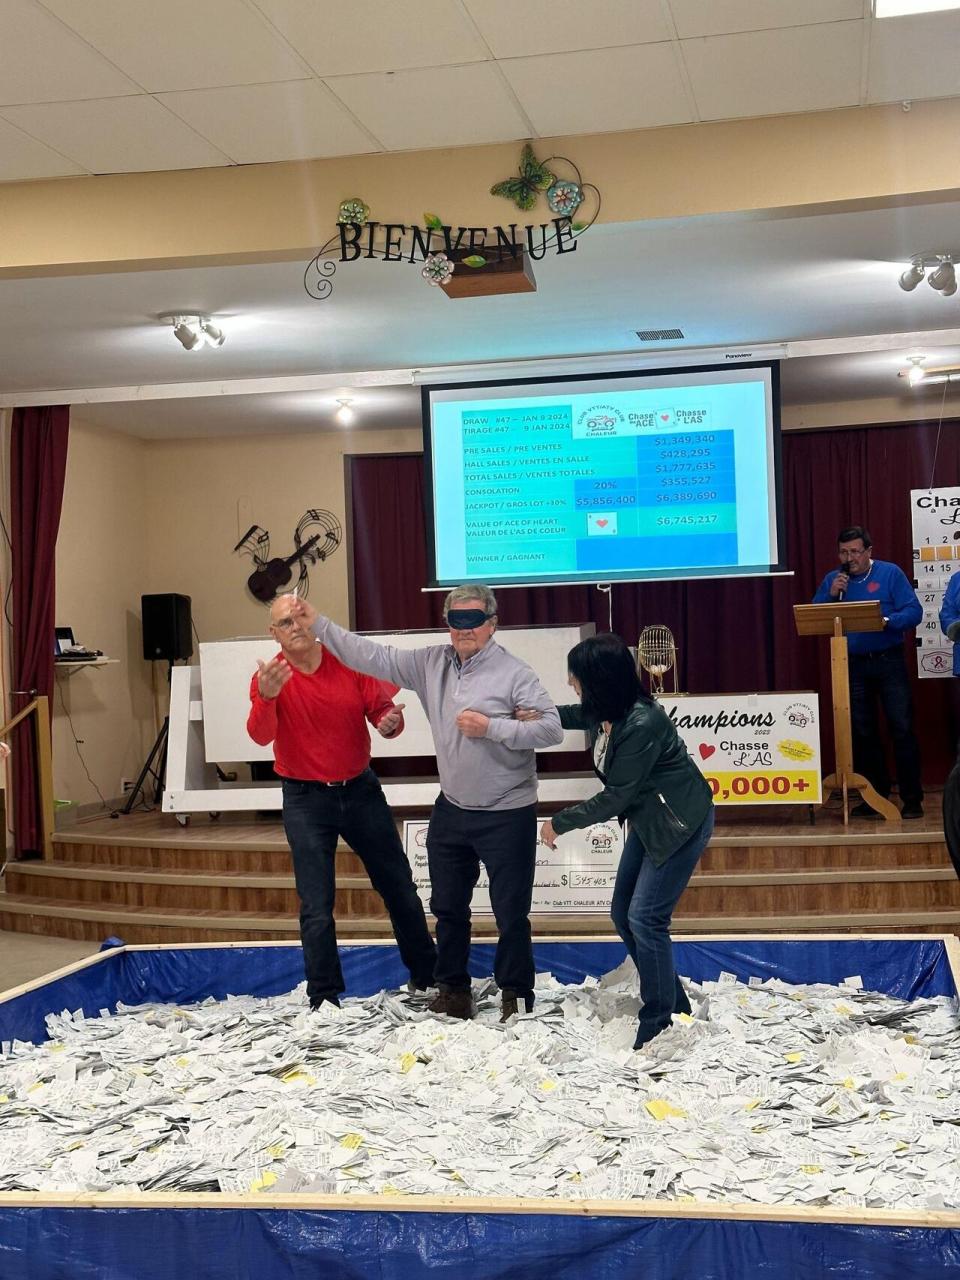 Doug Henderson was blindfolded and led into the pool of tickets to pick the winner of last week's draw.